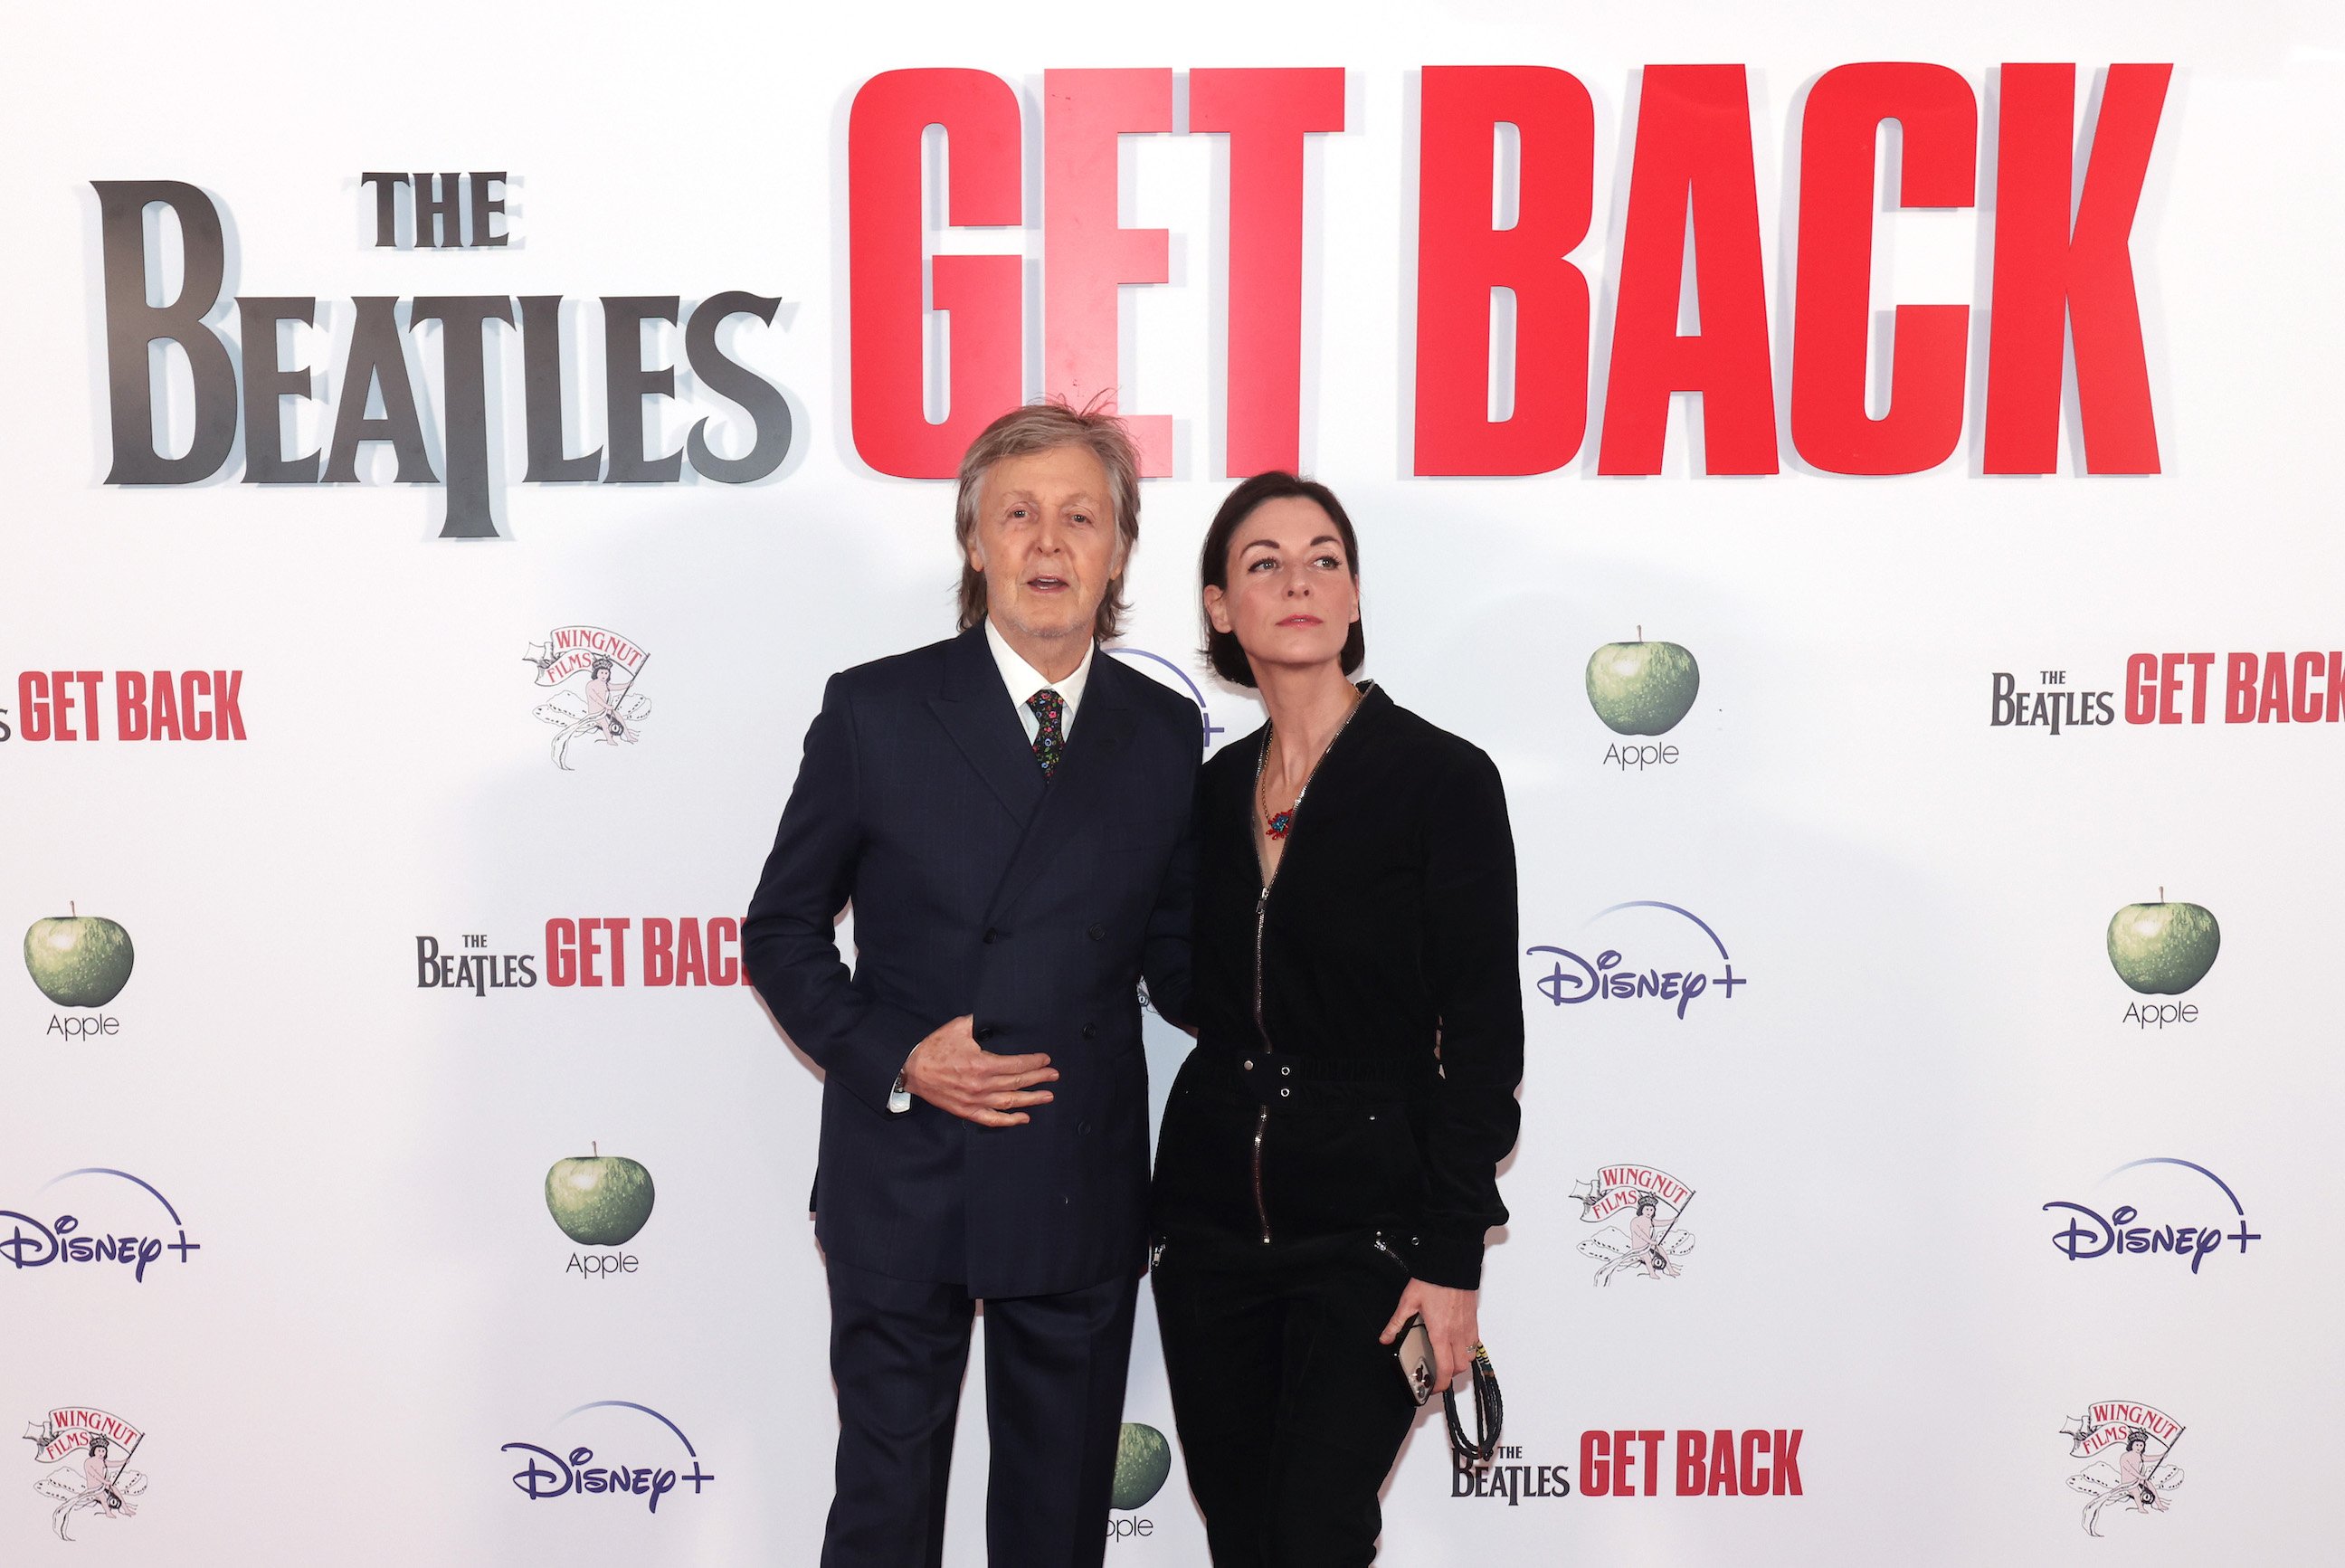 Paul McCartney and Mary McCartney attend the UK exclusive screening of The Beatles: Get Back in London, England